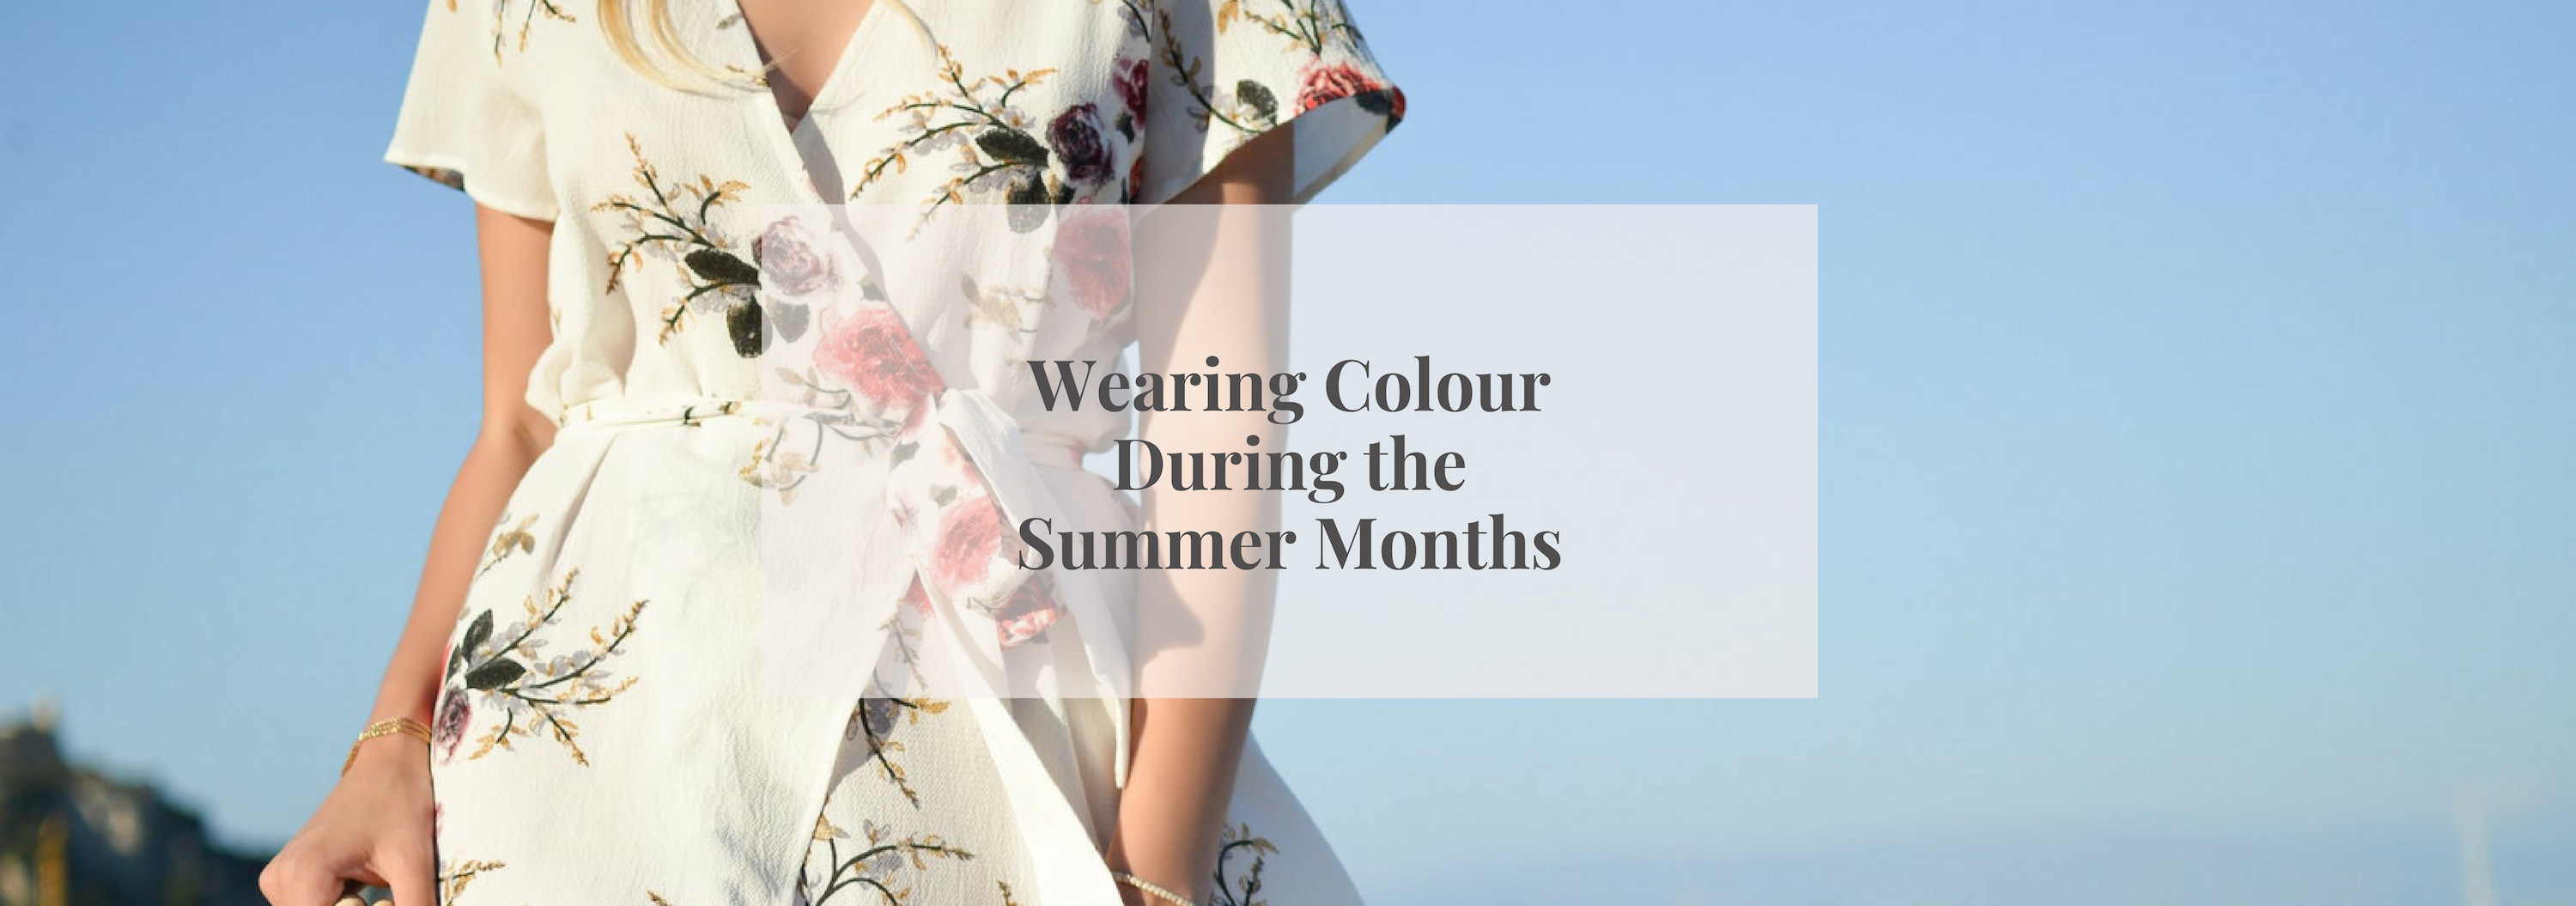 Wearing Colour During the Summer Months